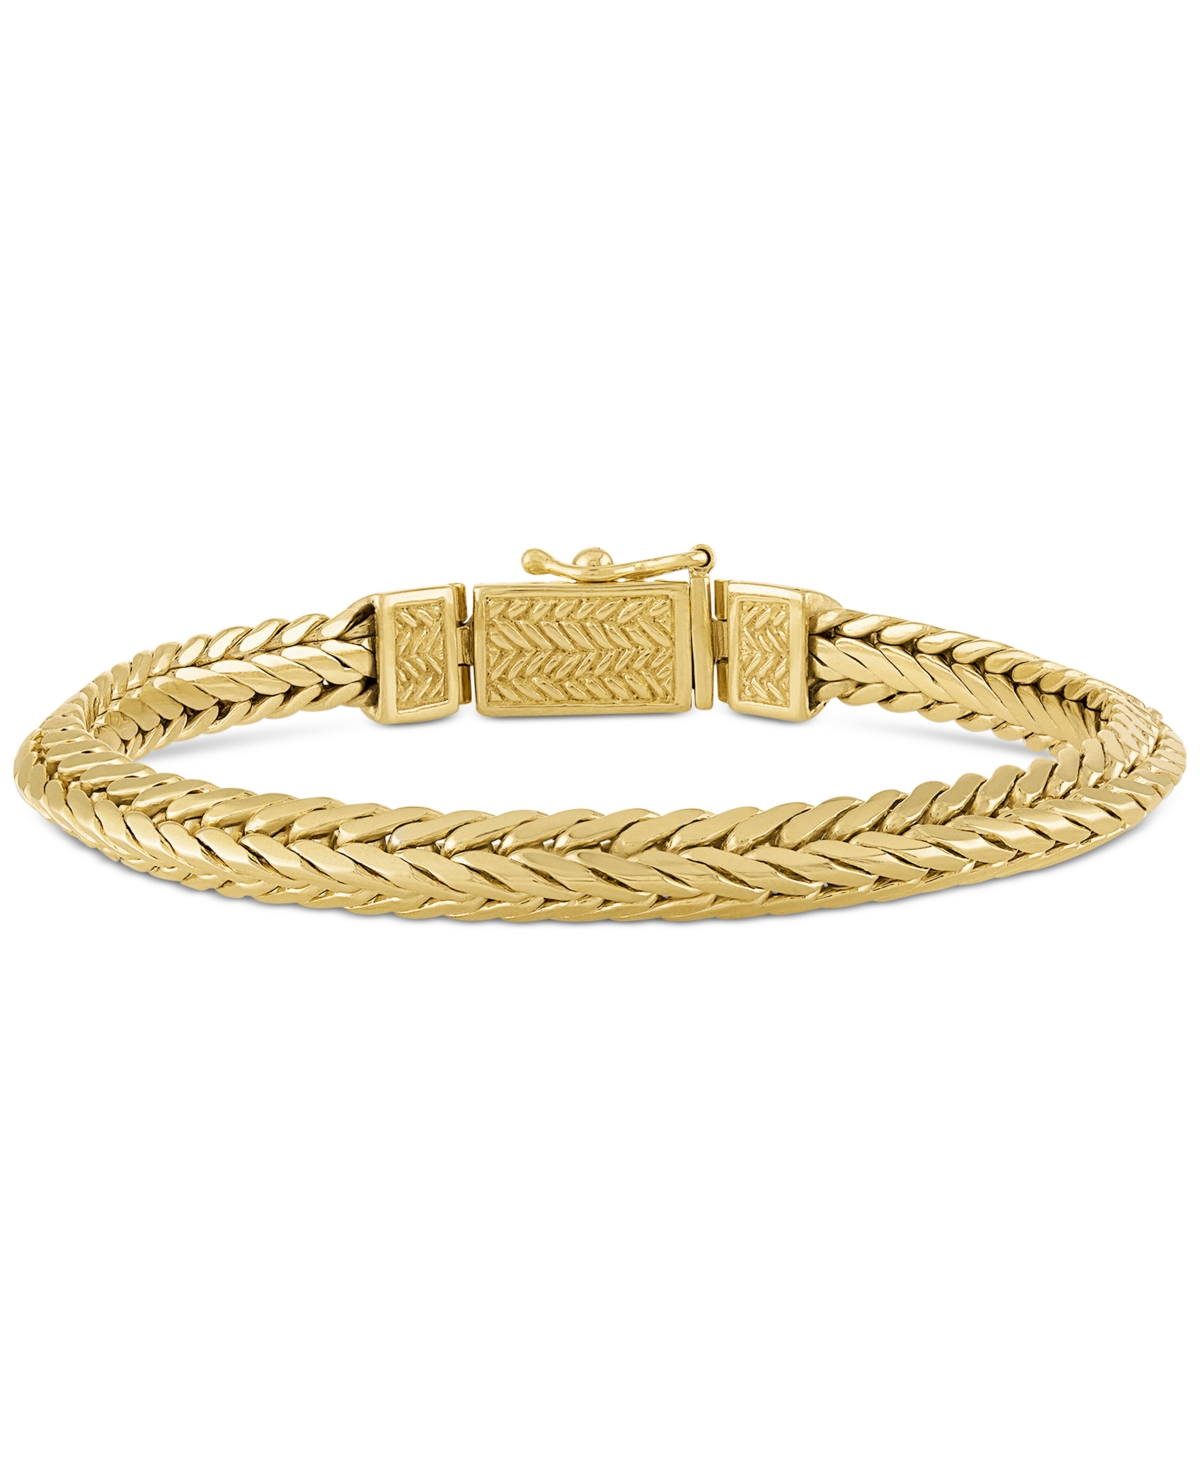 Esquire Men's Jewelry Woven Link Bracelet In 14k Gold-plated Sterling Silver, Created For Macy's In Gold Over Silver